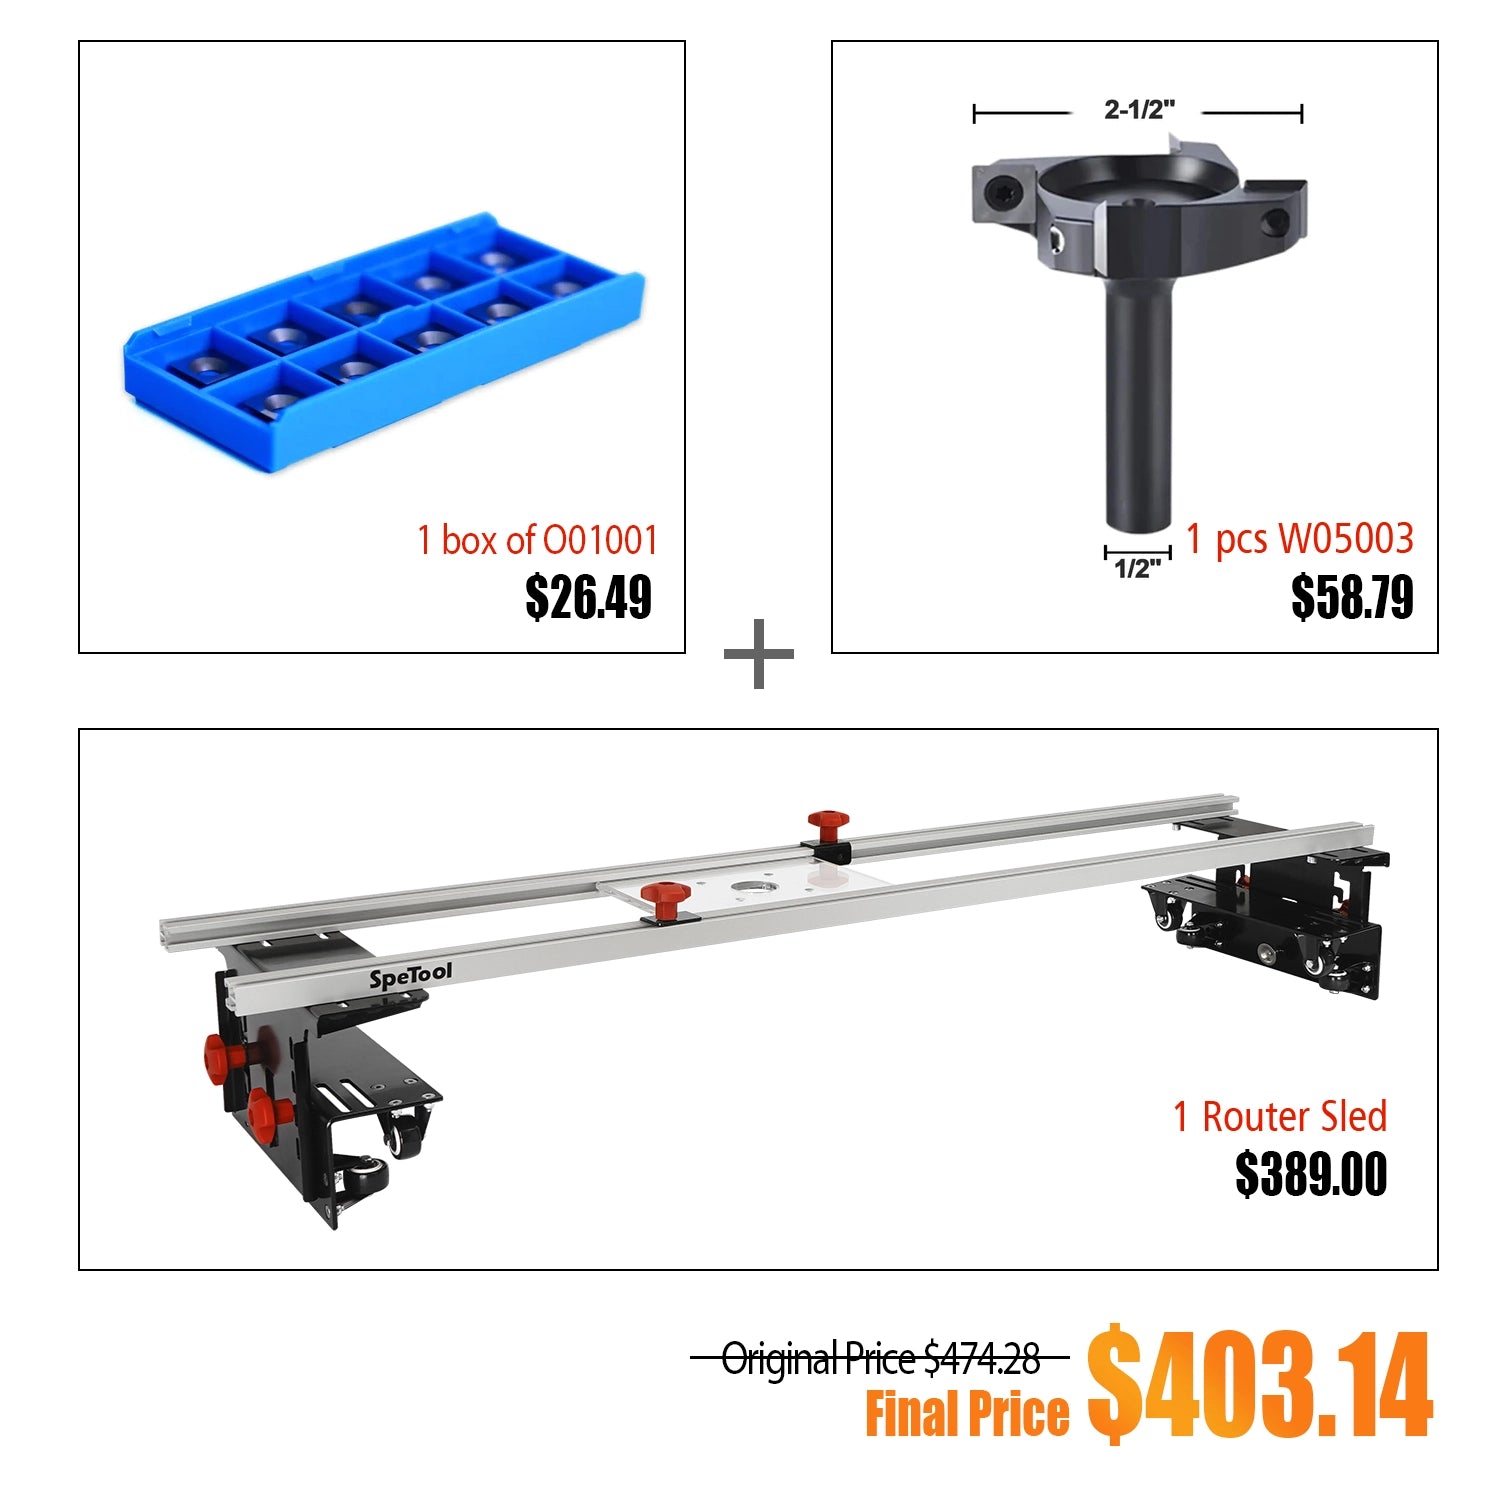 !!!【Pre-ordering】Bundle buying Save Up To $74 | SpeTool Cratos S01001 Machinist-Grade Router Sled & Spoilboard Surfacing Bits & Carbide Insert Kits - 0